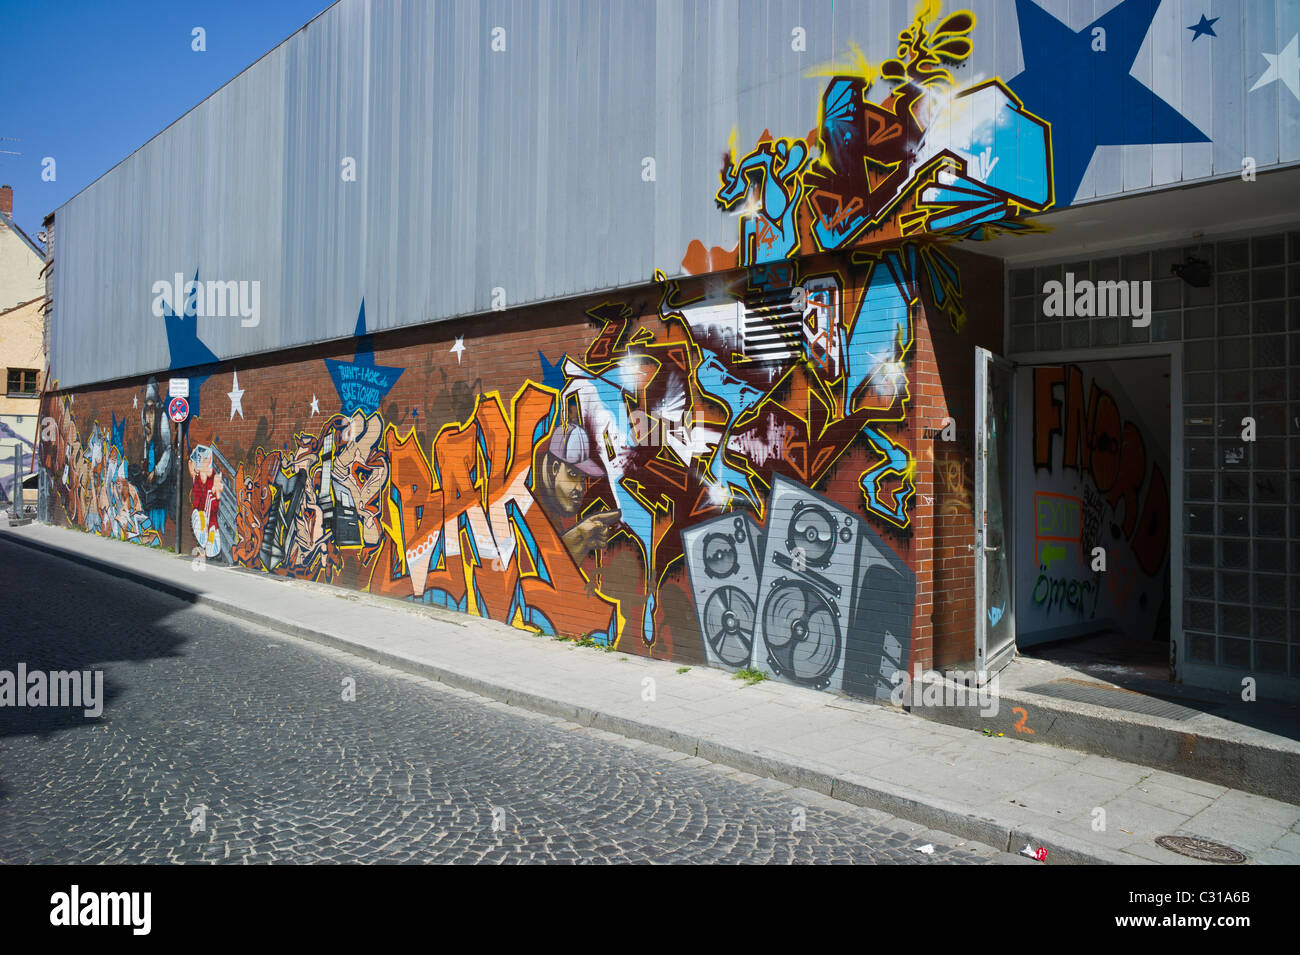 Artful graffiti on a long brick wall in Munich-Giesing showing a colorful tag and different elements of hip hop culture, Germany Stock Photo